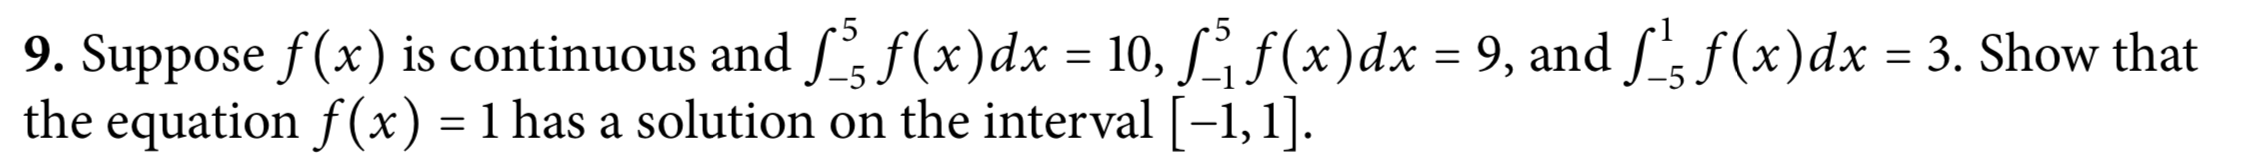 9. Suppose f(x) is continuous and f(x)dx = 10, f(x)dx
the equation f(x) = 1 has a solution on the interval [-1,1].
9, and L, f(x)dx = 3. Show that
=
